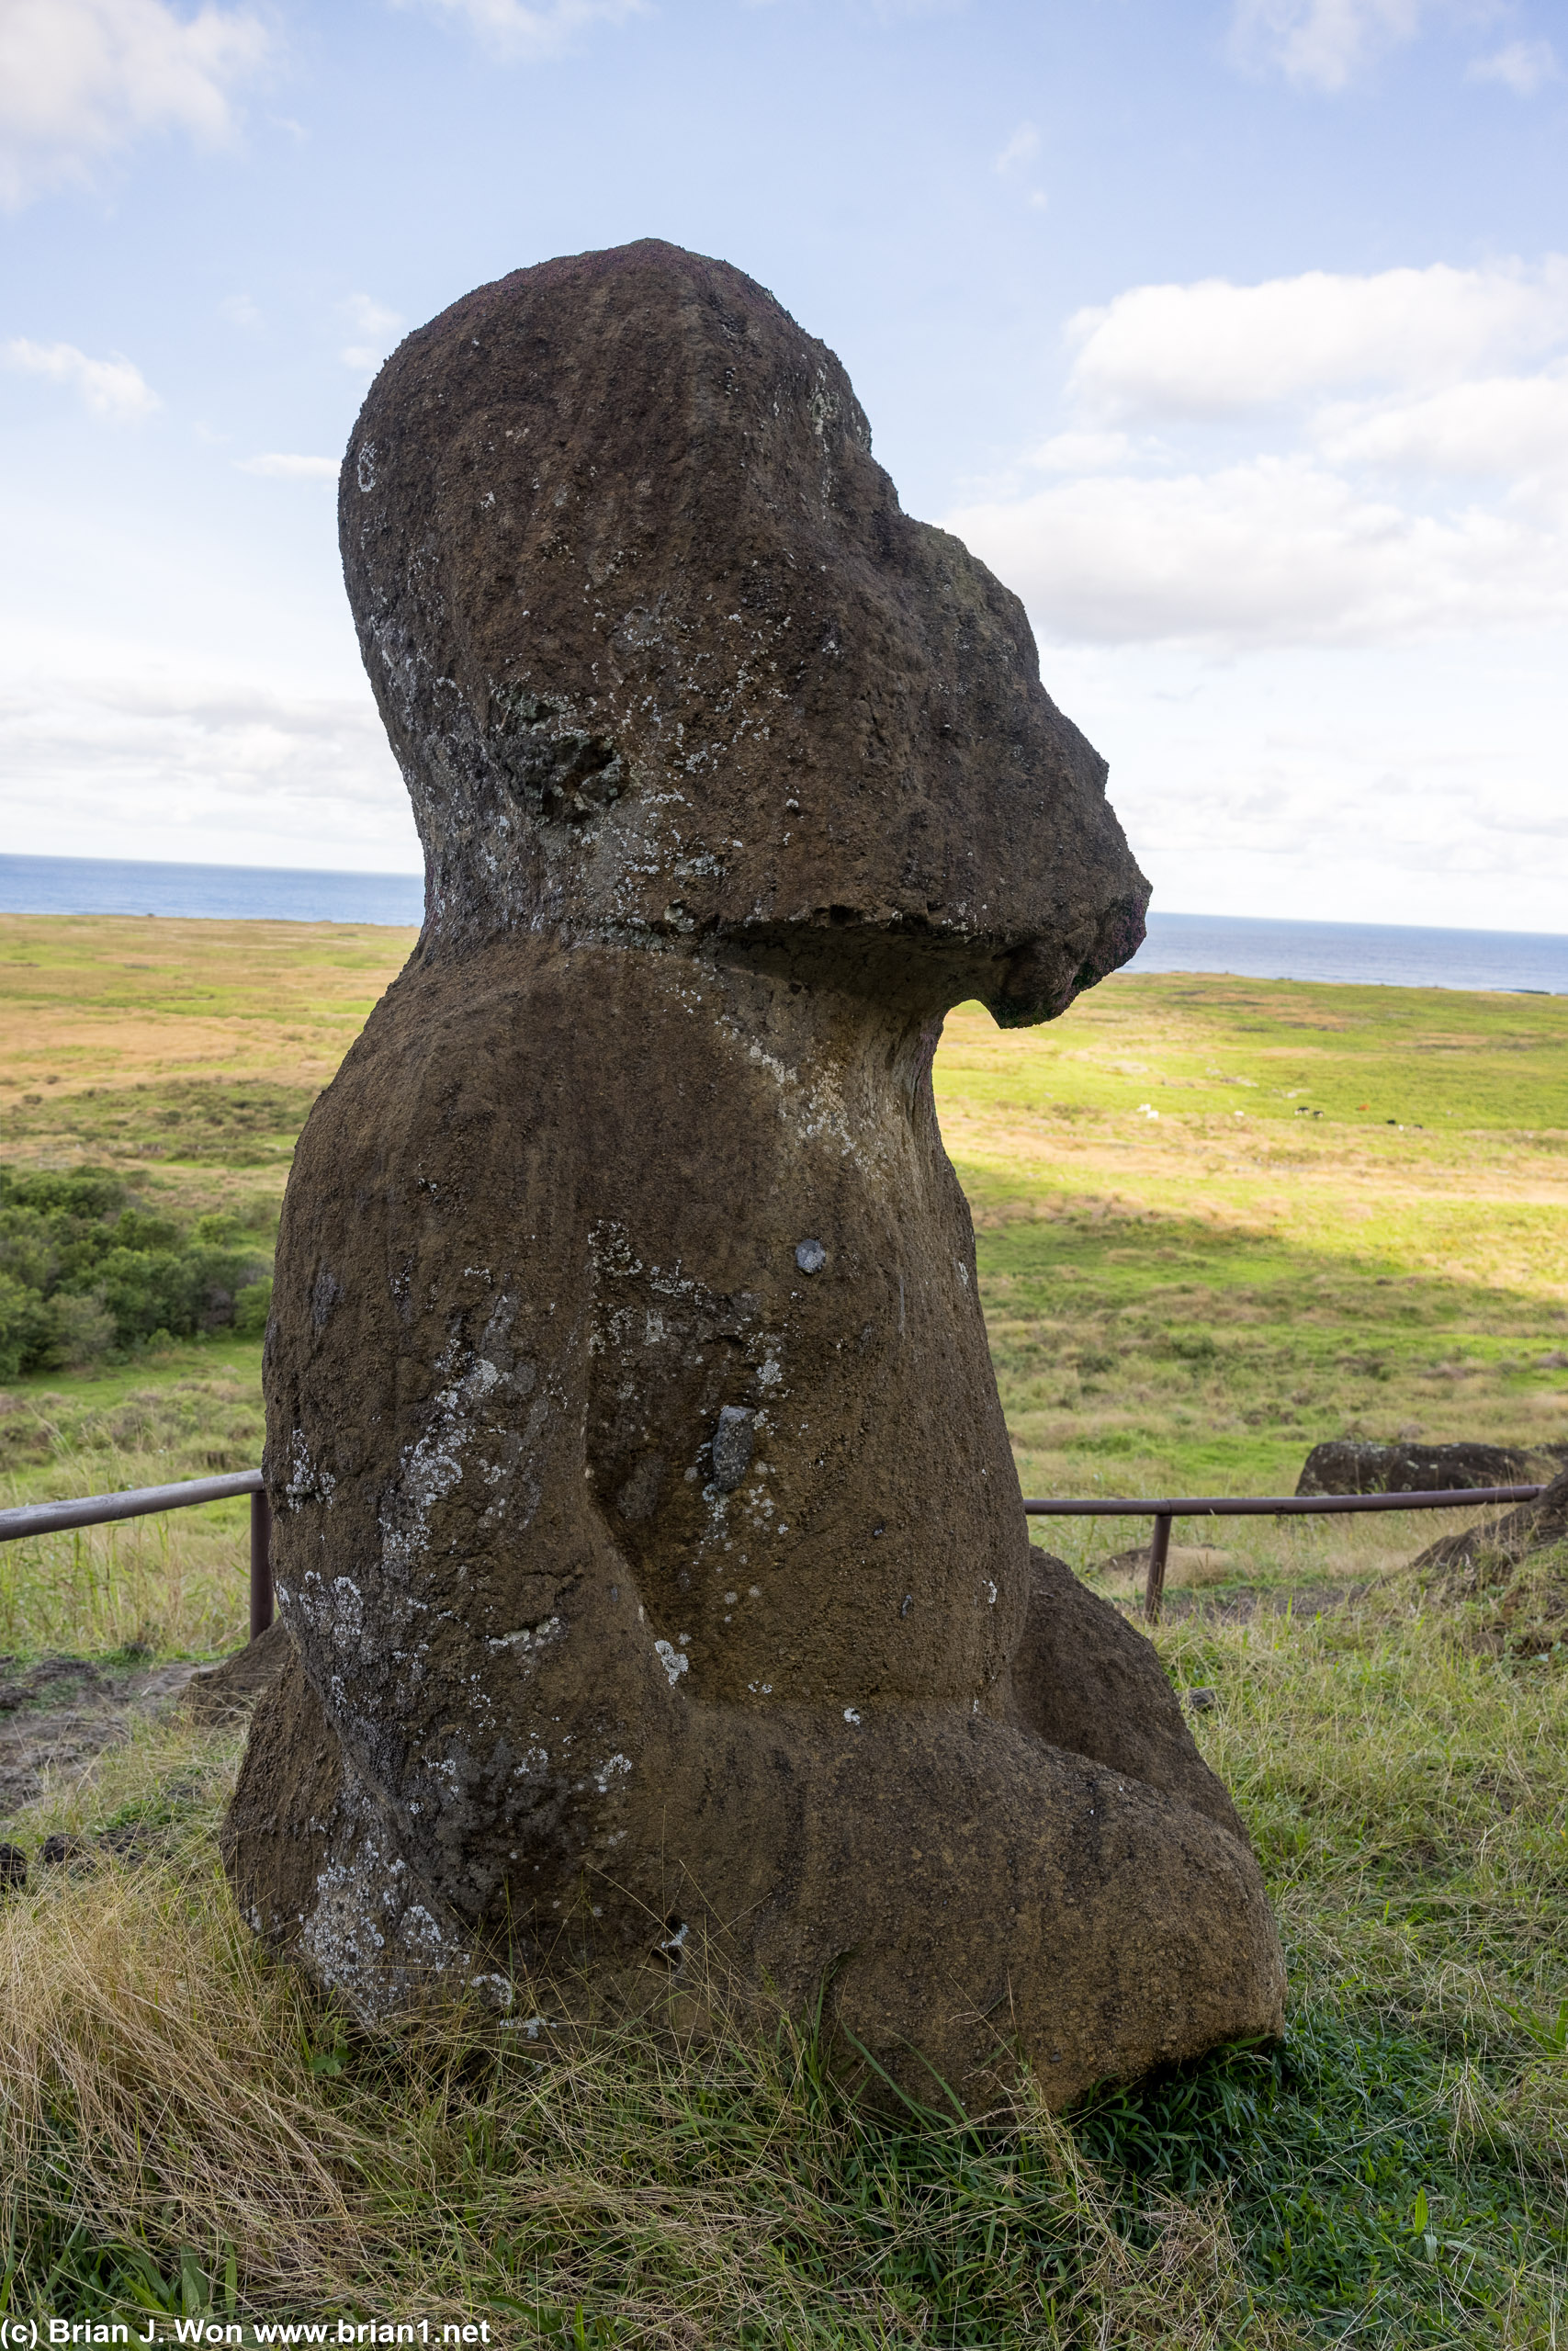 Unusually well preserved hands and arms on this moai.